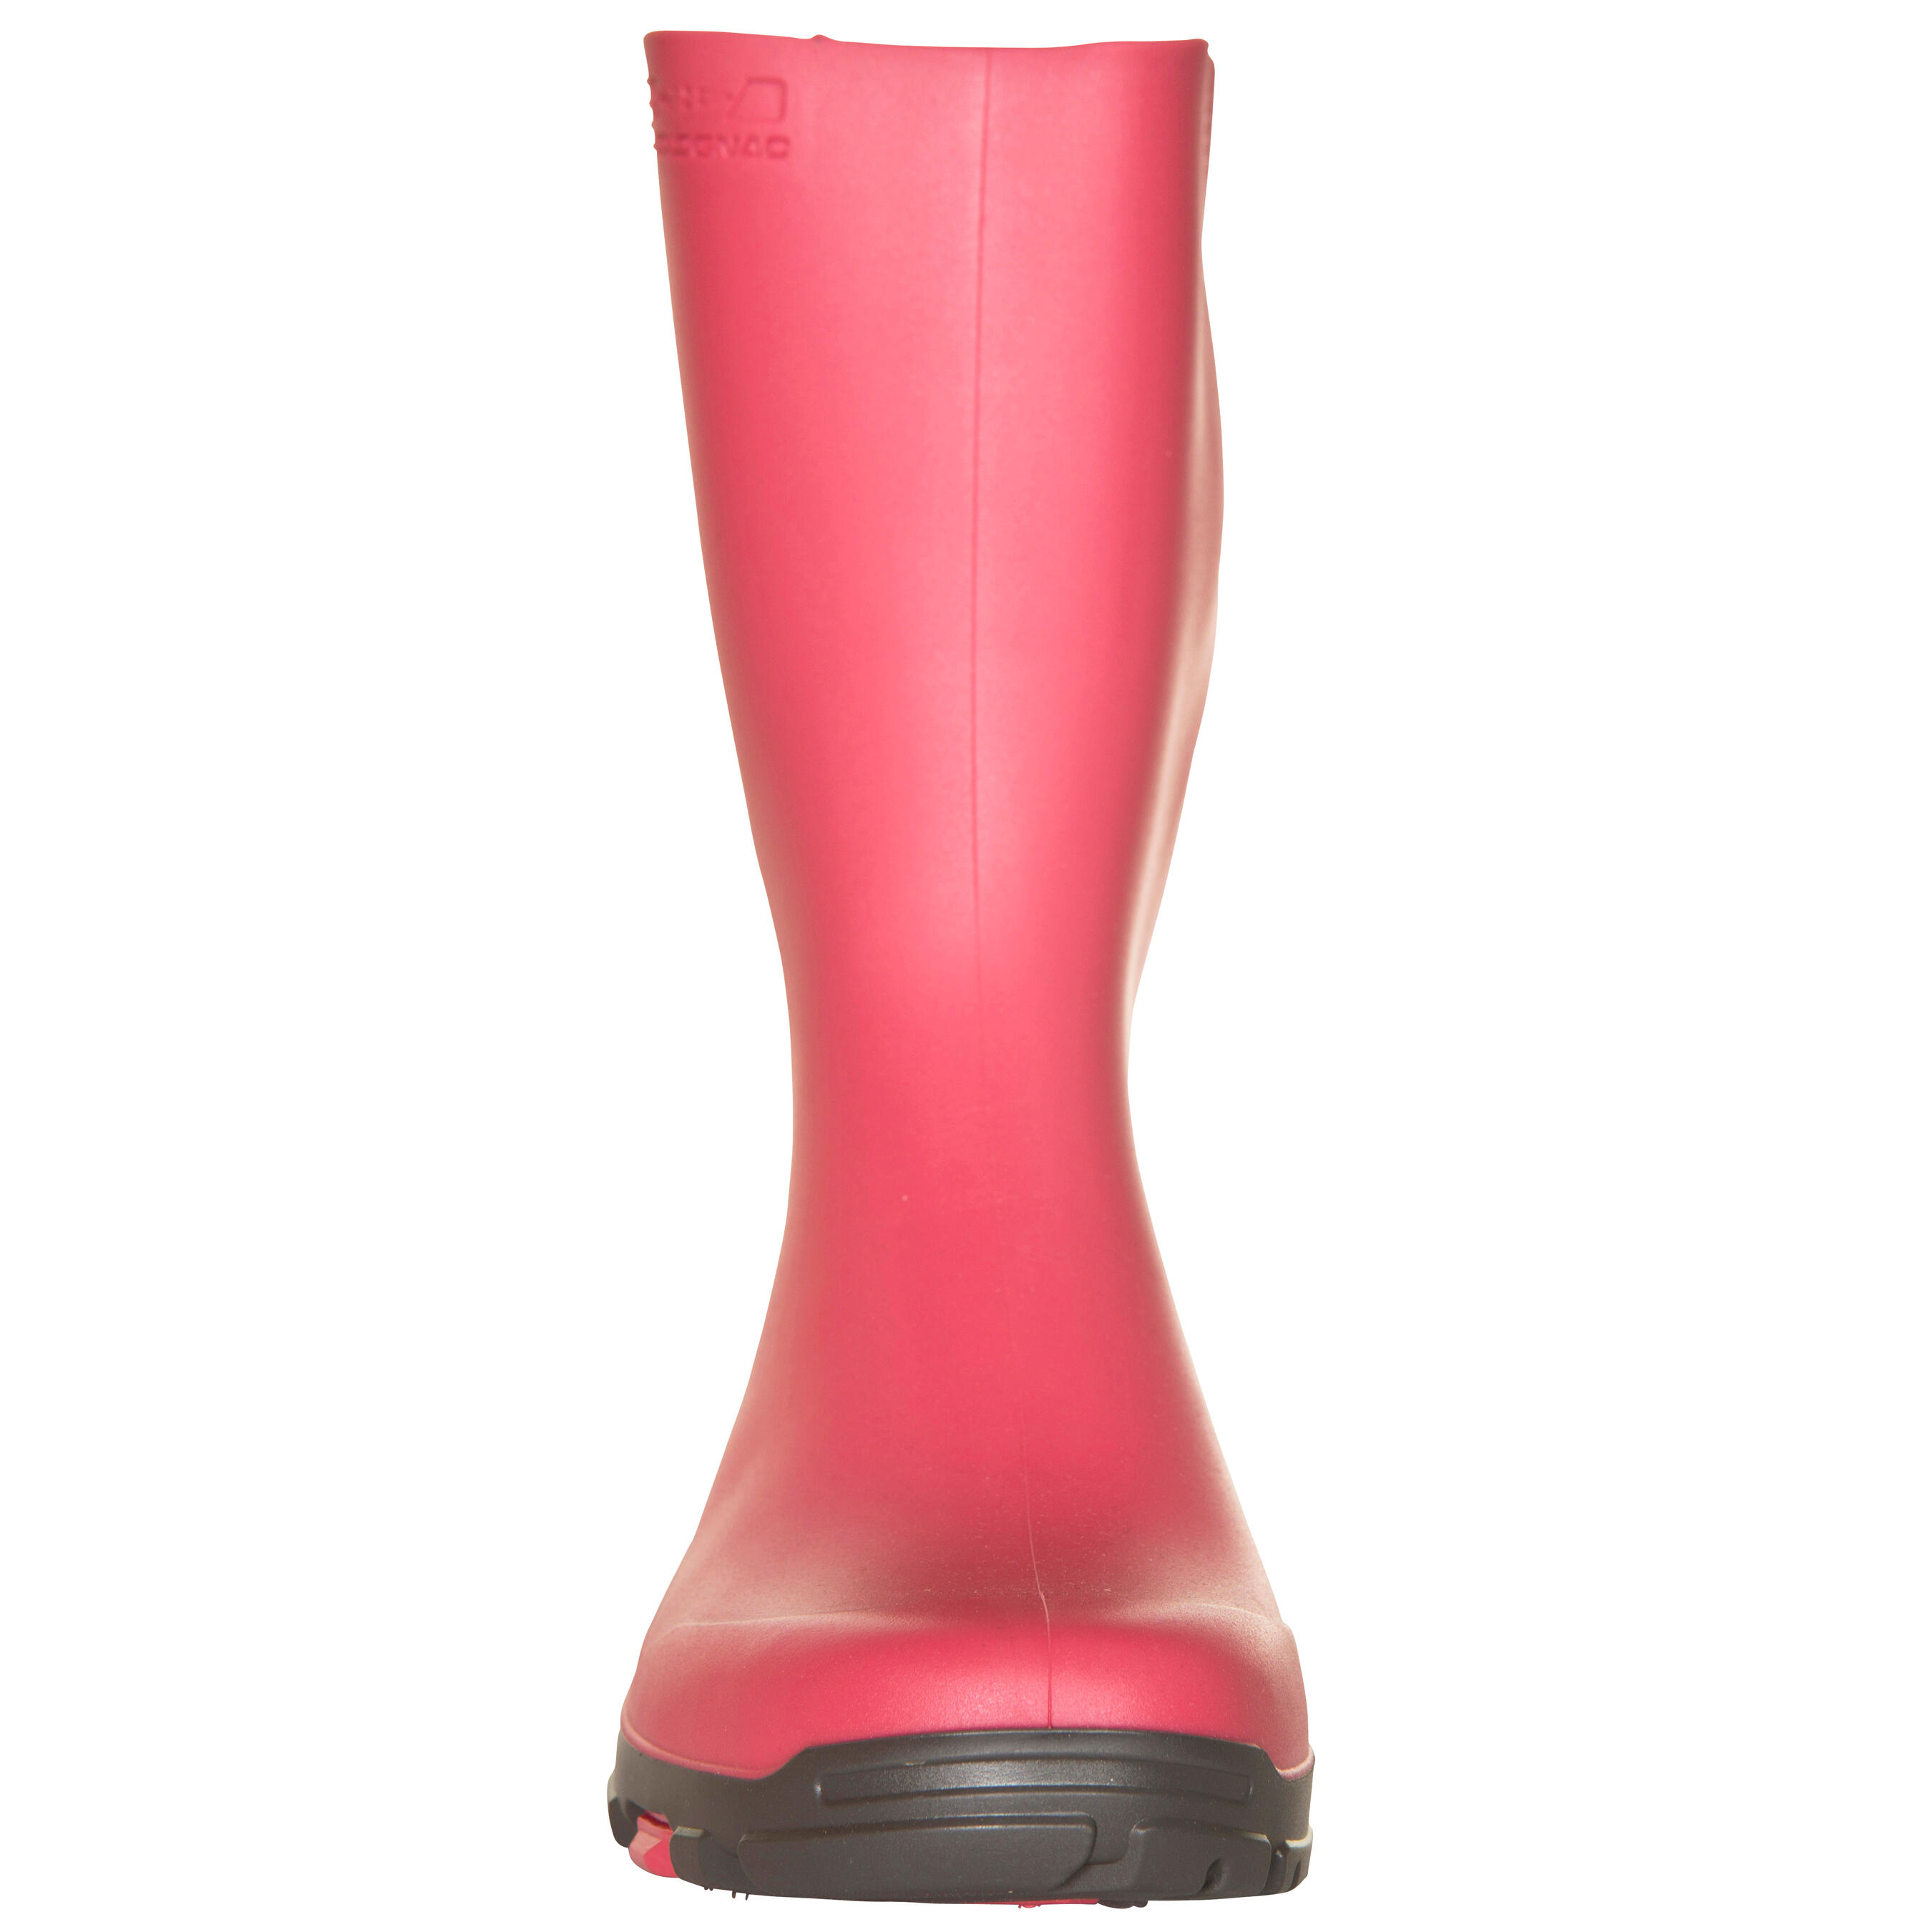 Inverness 100 Women's Ankle Boots - Pink 4/10